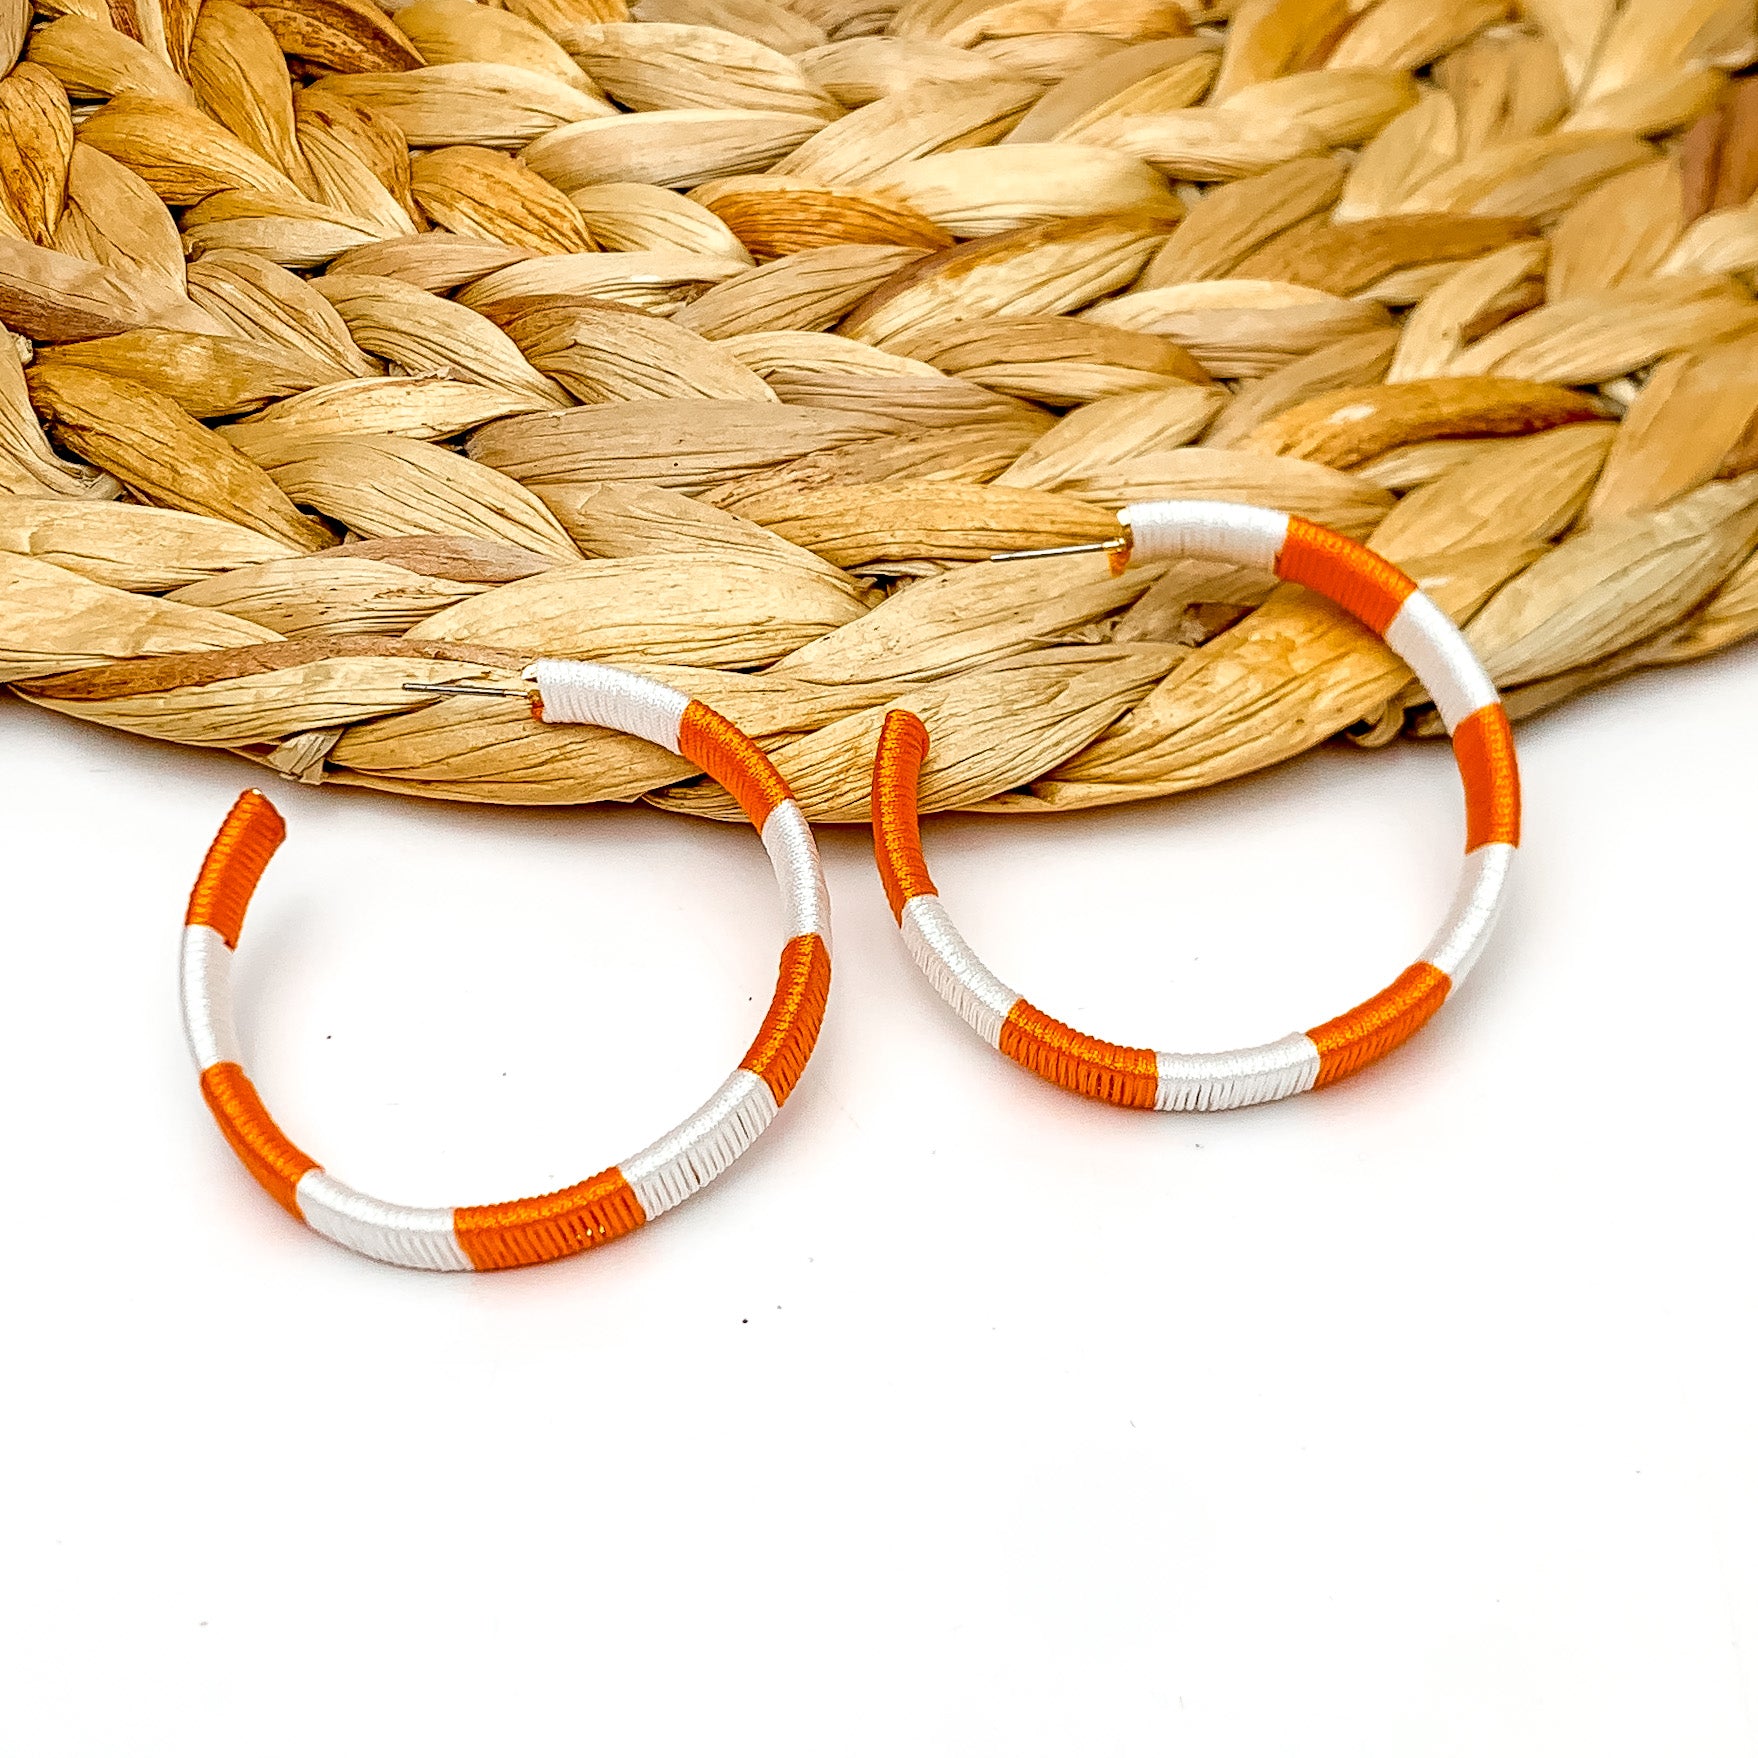 Game Day Glam Colored Hoop Earrings in Orange and White. The two colored hoops are laying against a woven decoration with a white background.